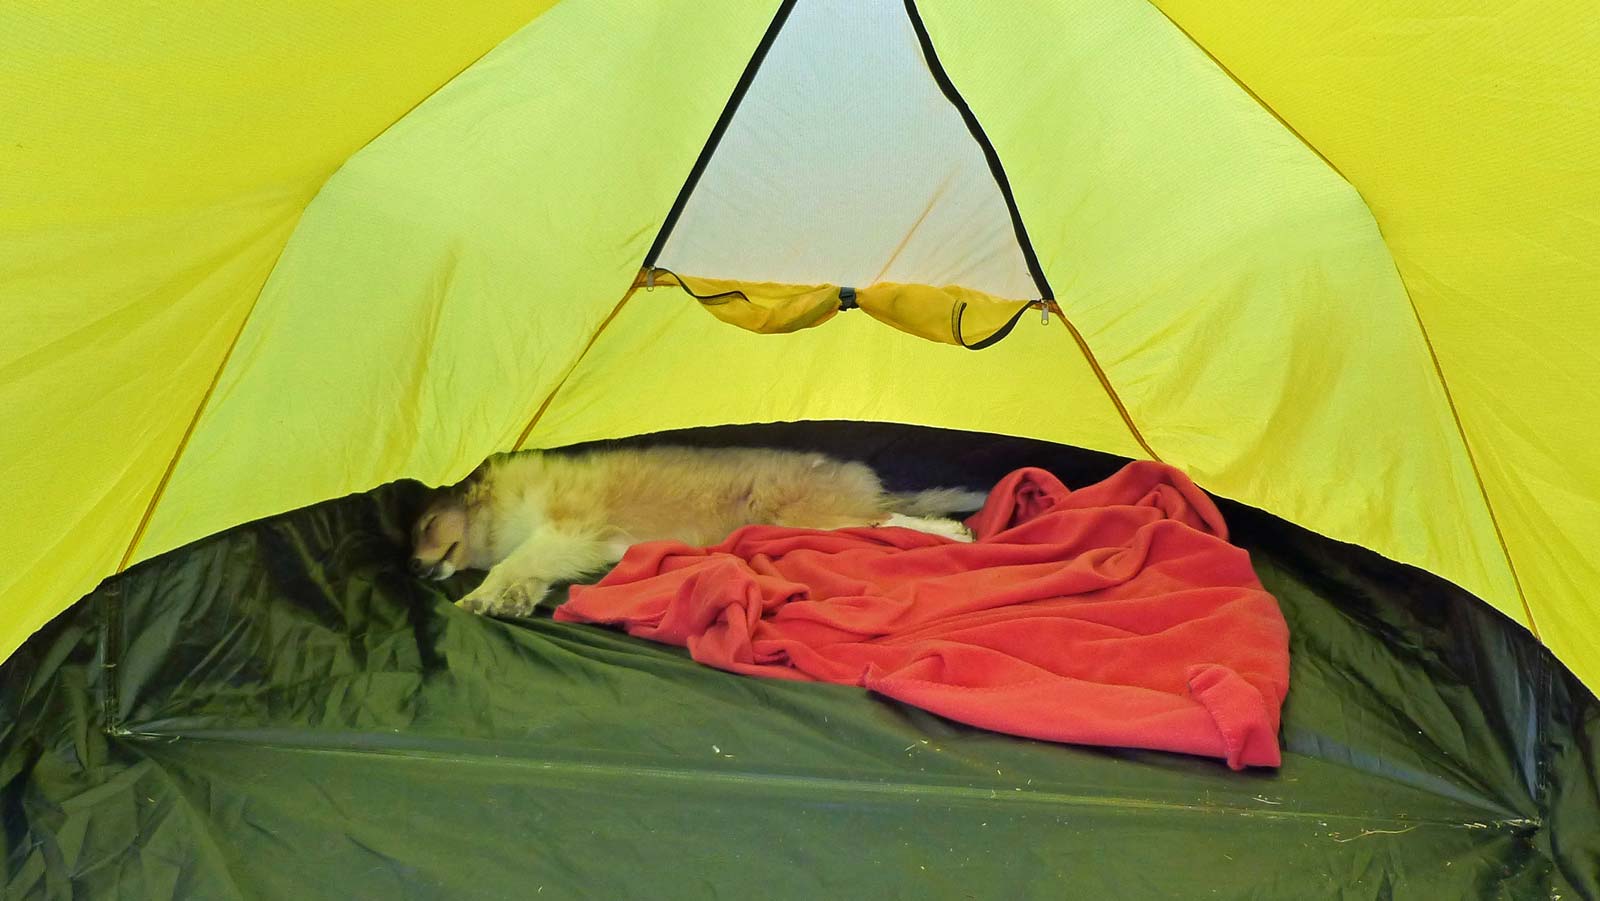 <span lang="en">Lava recovering in the tent, July 26 2013 15:25</span>